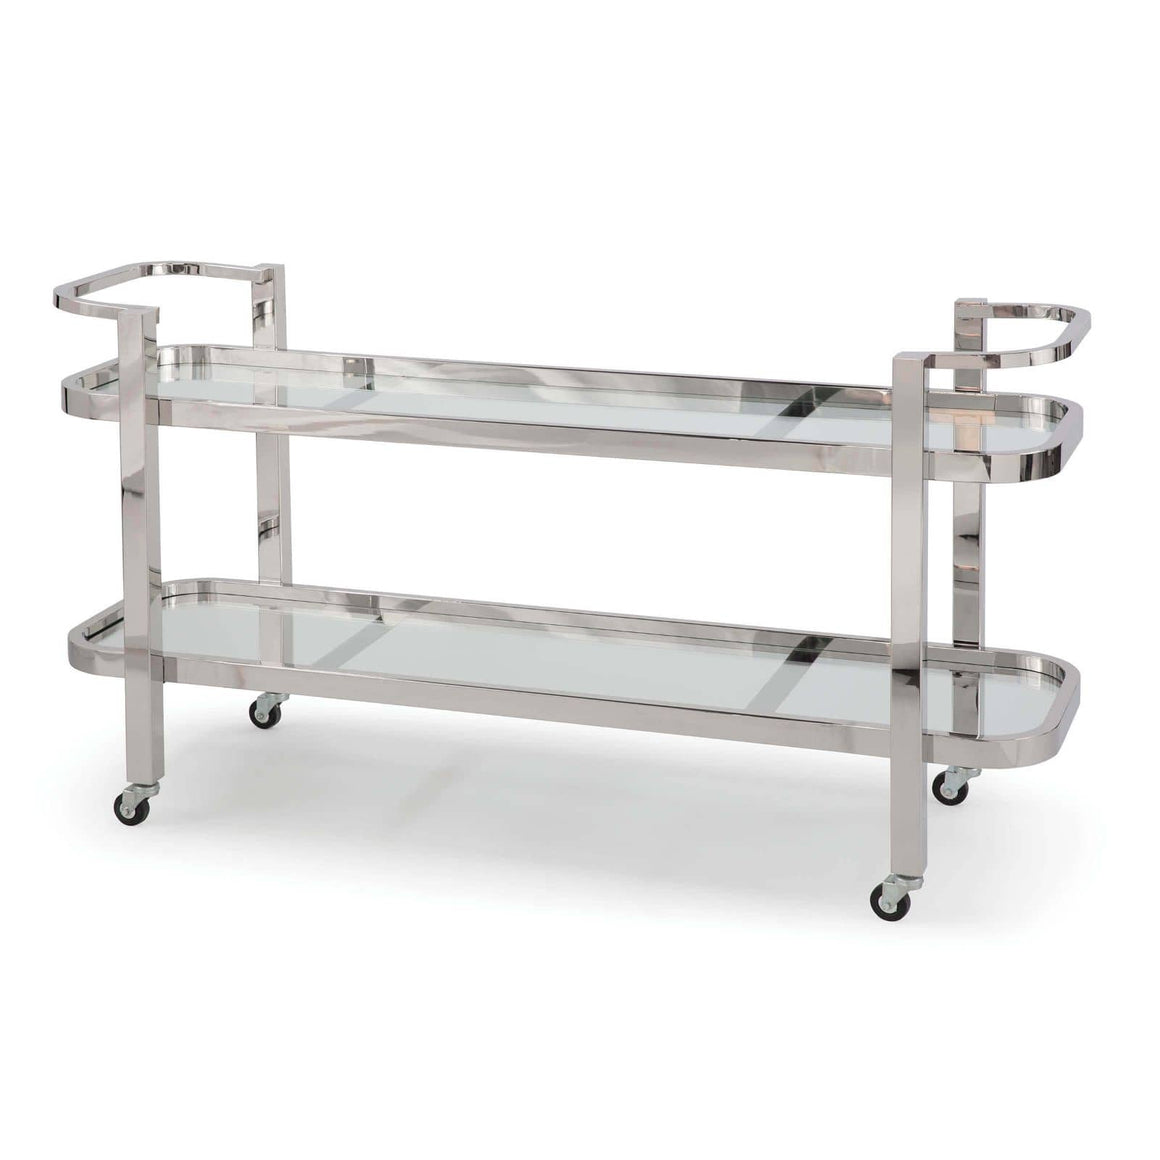 Carter Bar Cart (Polished Stainless Steel)